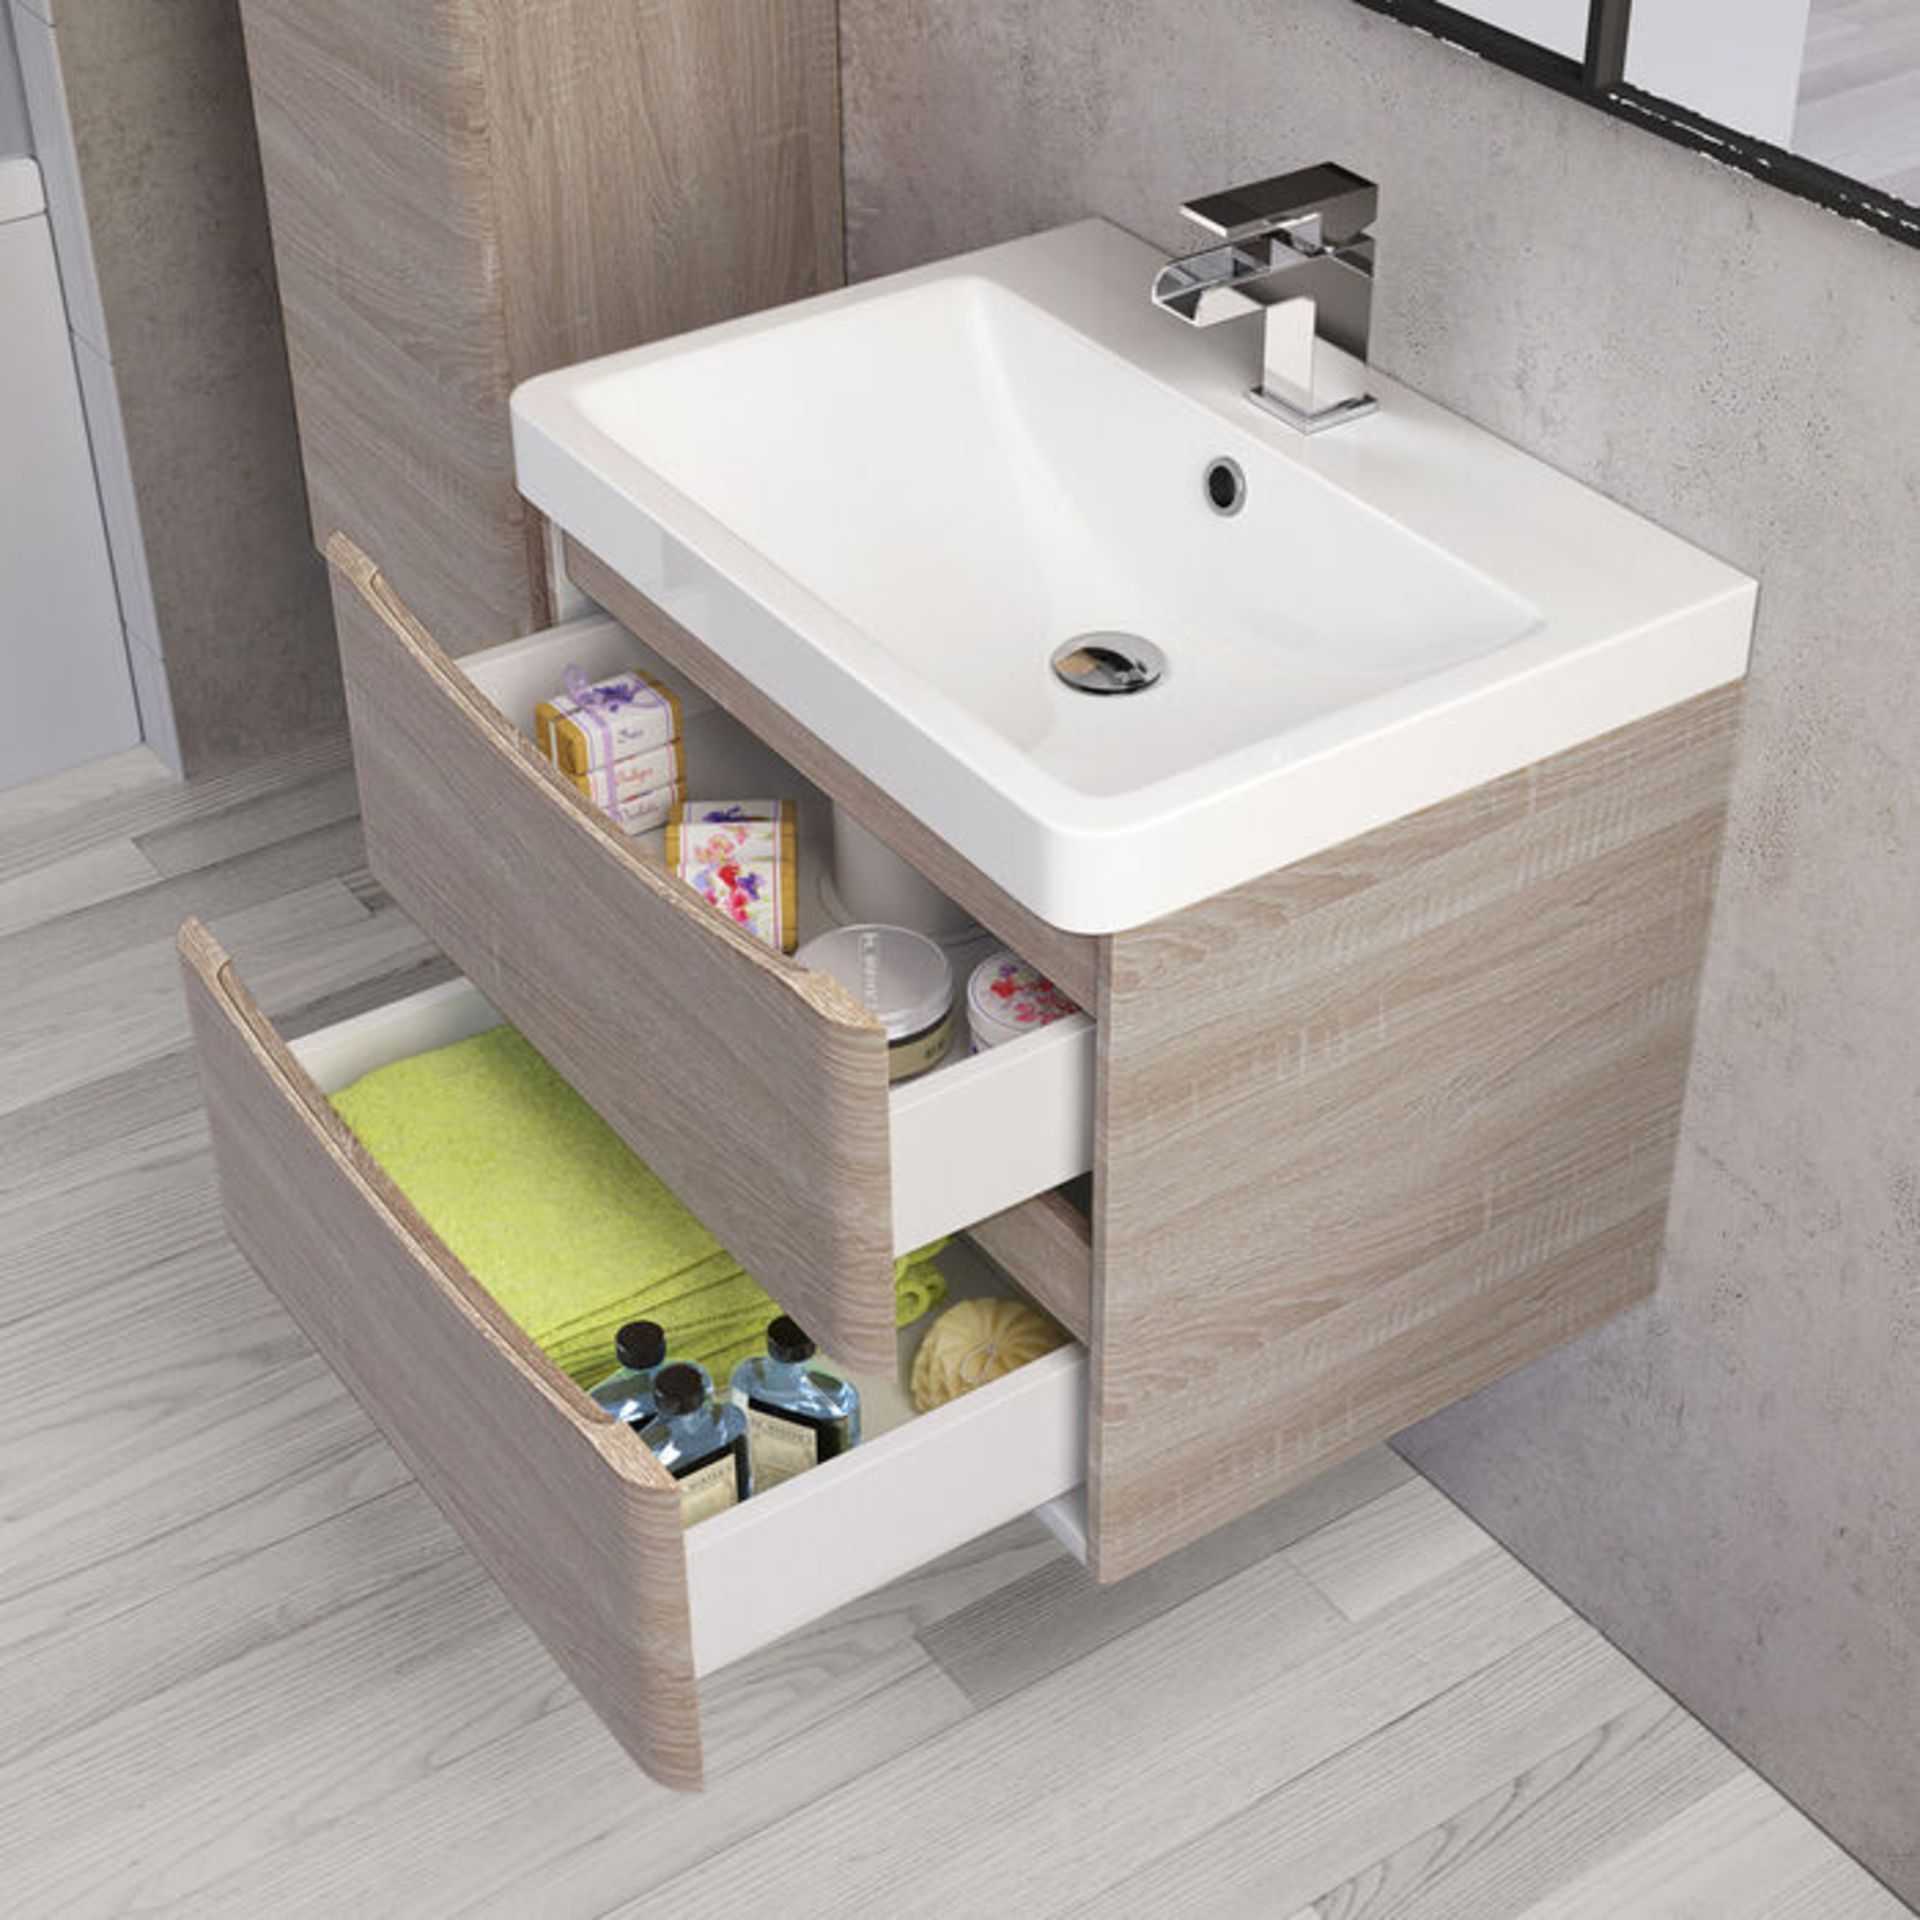 NEW & BOXED 600mm Austin II Light Oak Effect Built In Sink Drawer Unit - Wall Hung. RRP £849.99. - Image 2 of 2